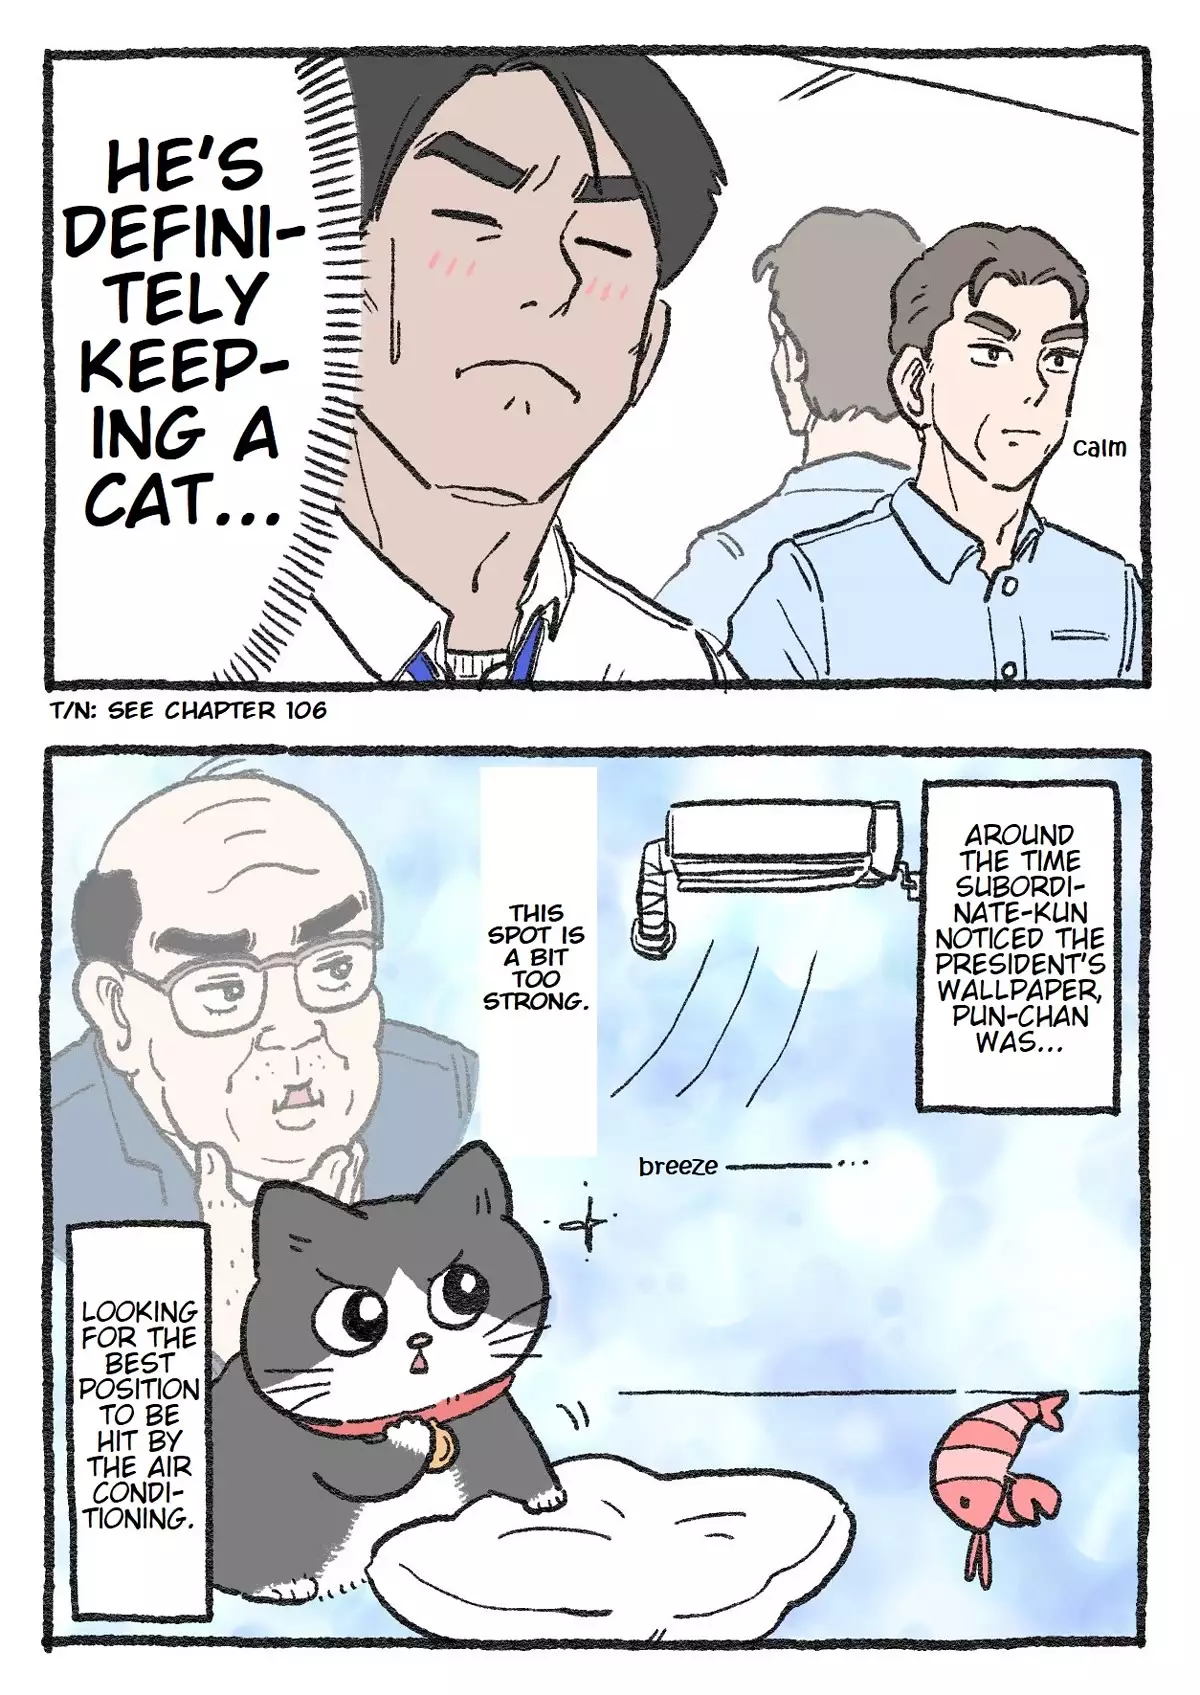 The Old Man Who Was Reincarnated As A Cat - 170 page 2-7d0c5010